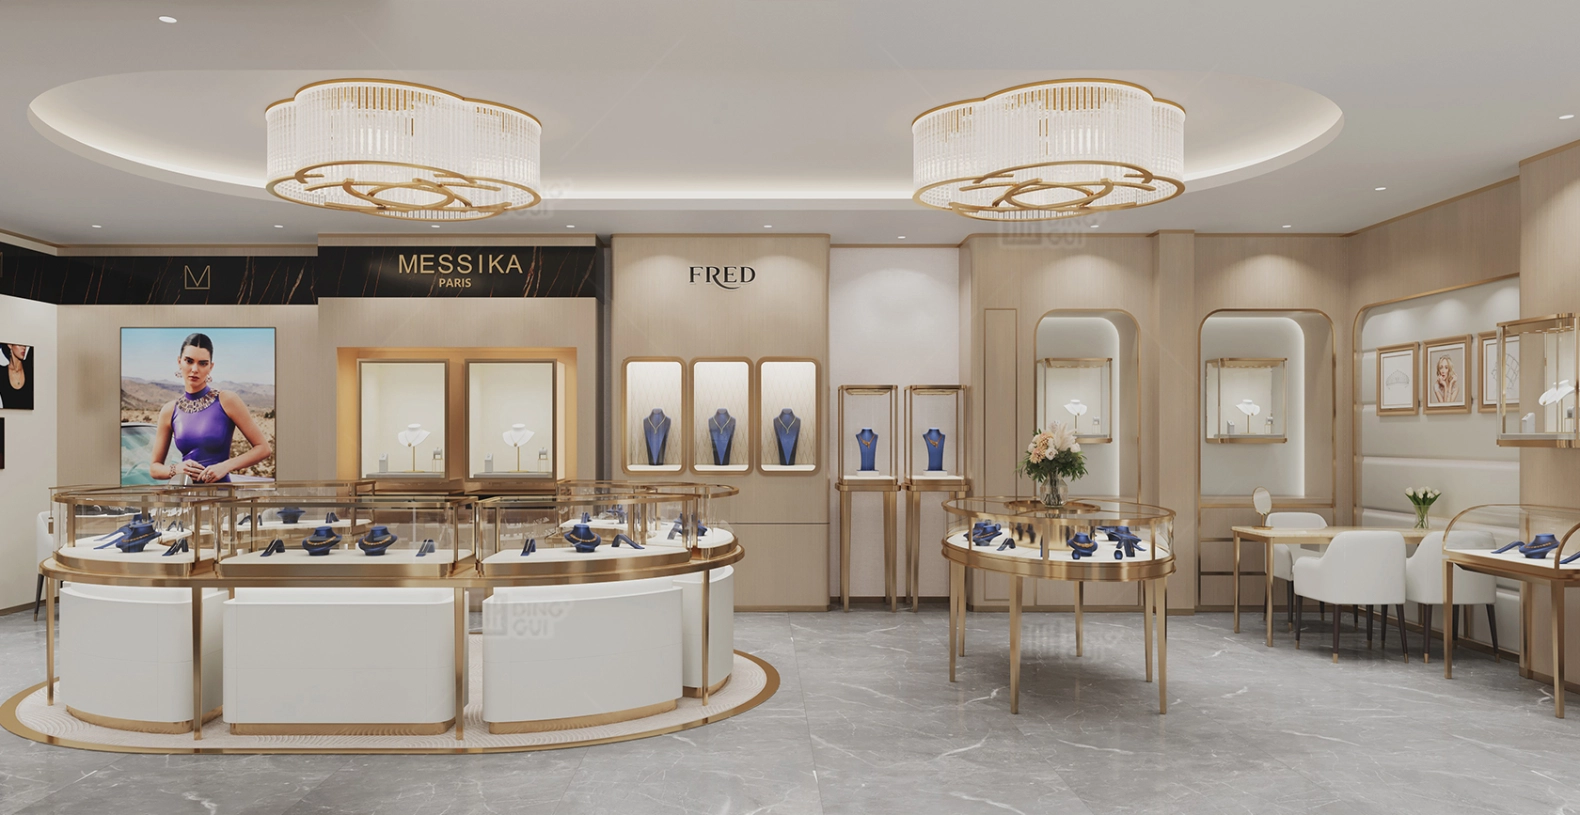 DG Master of Display Showcase Completes Project for High-End French Jewelry and Watch Brand